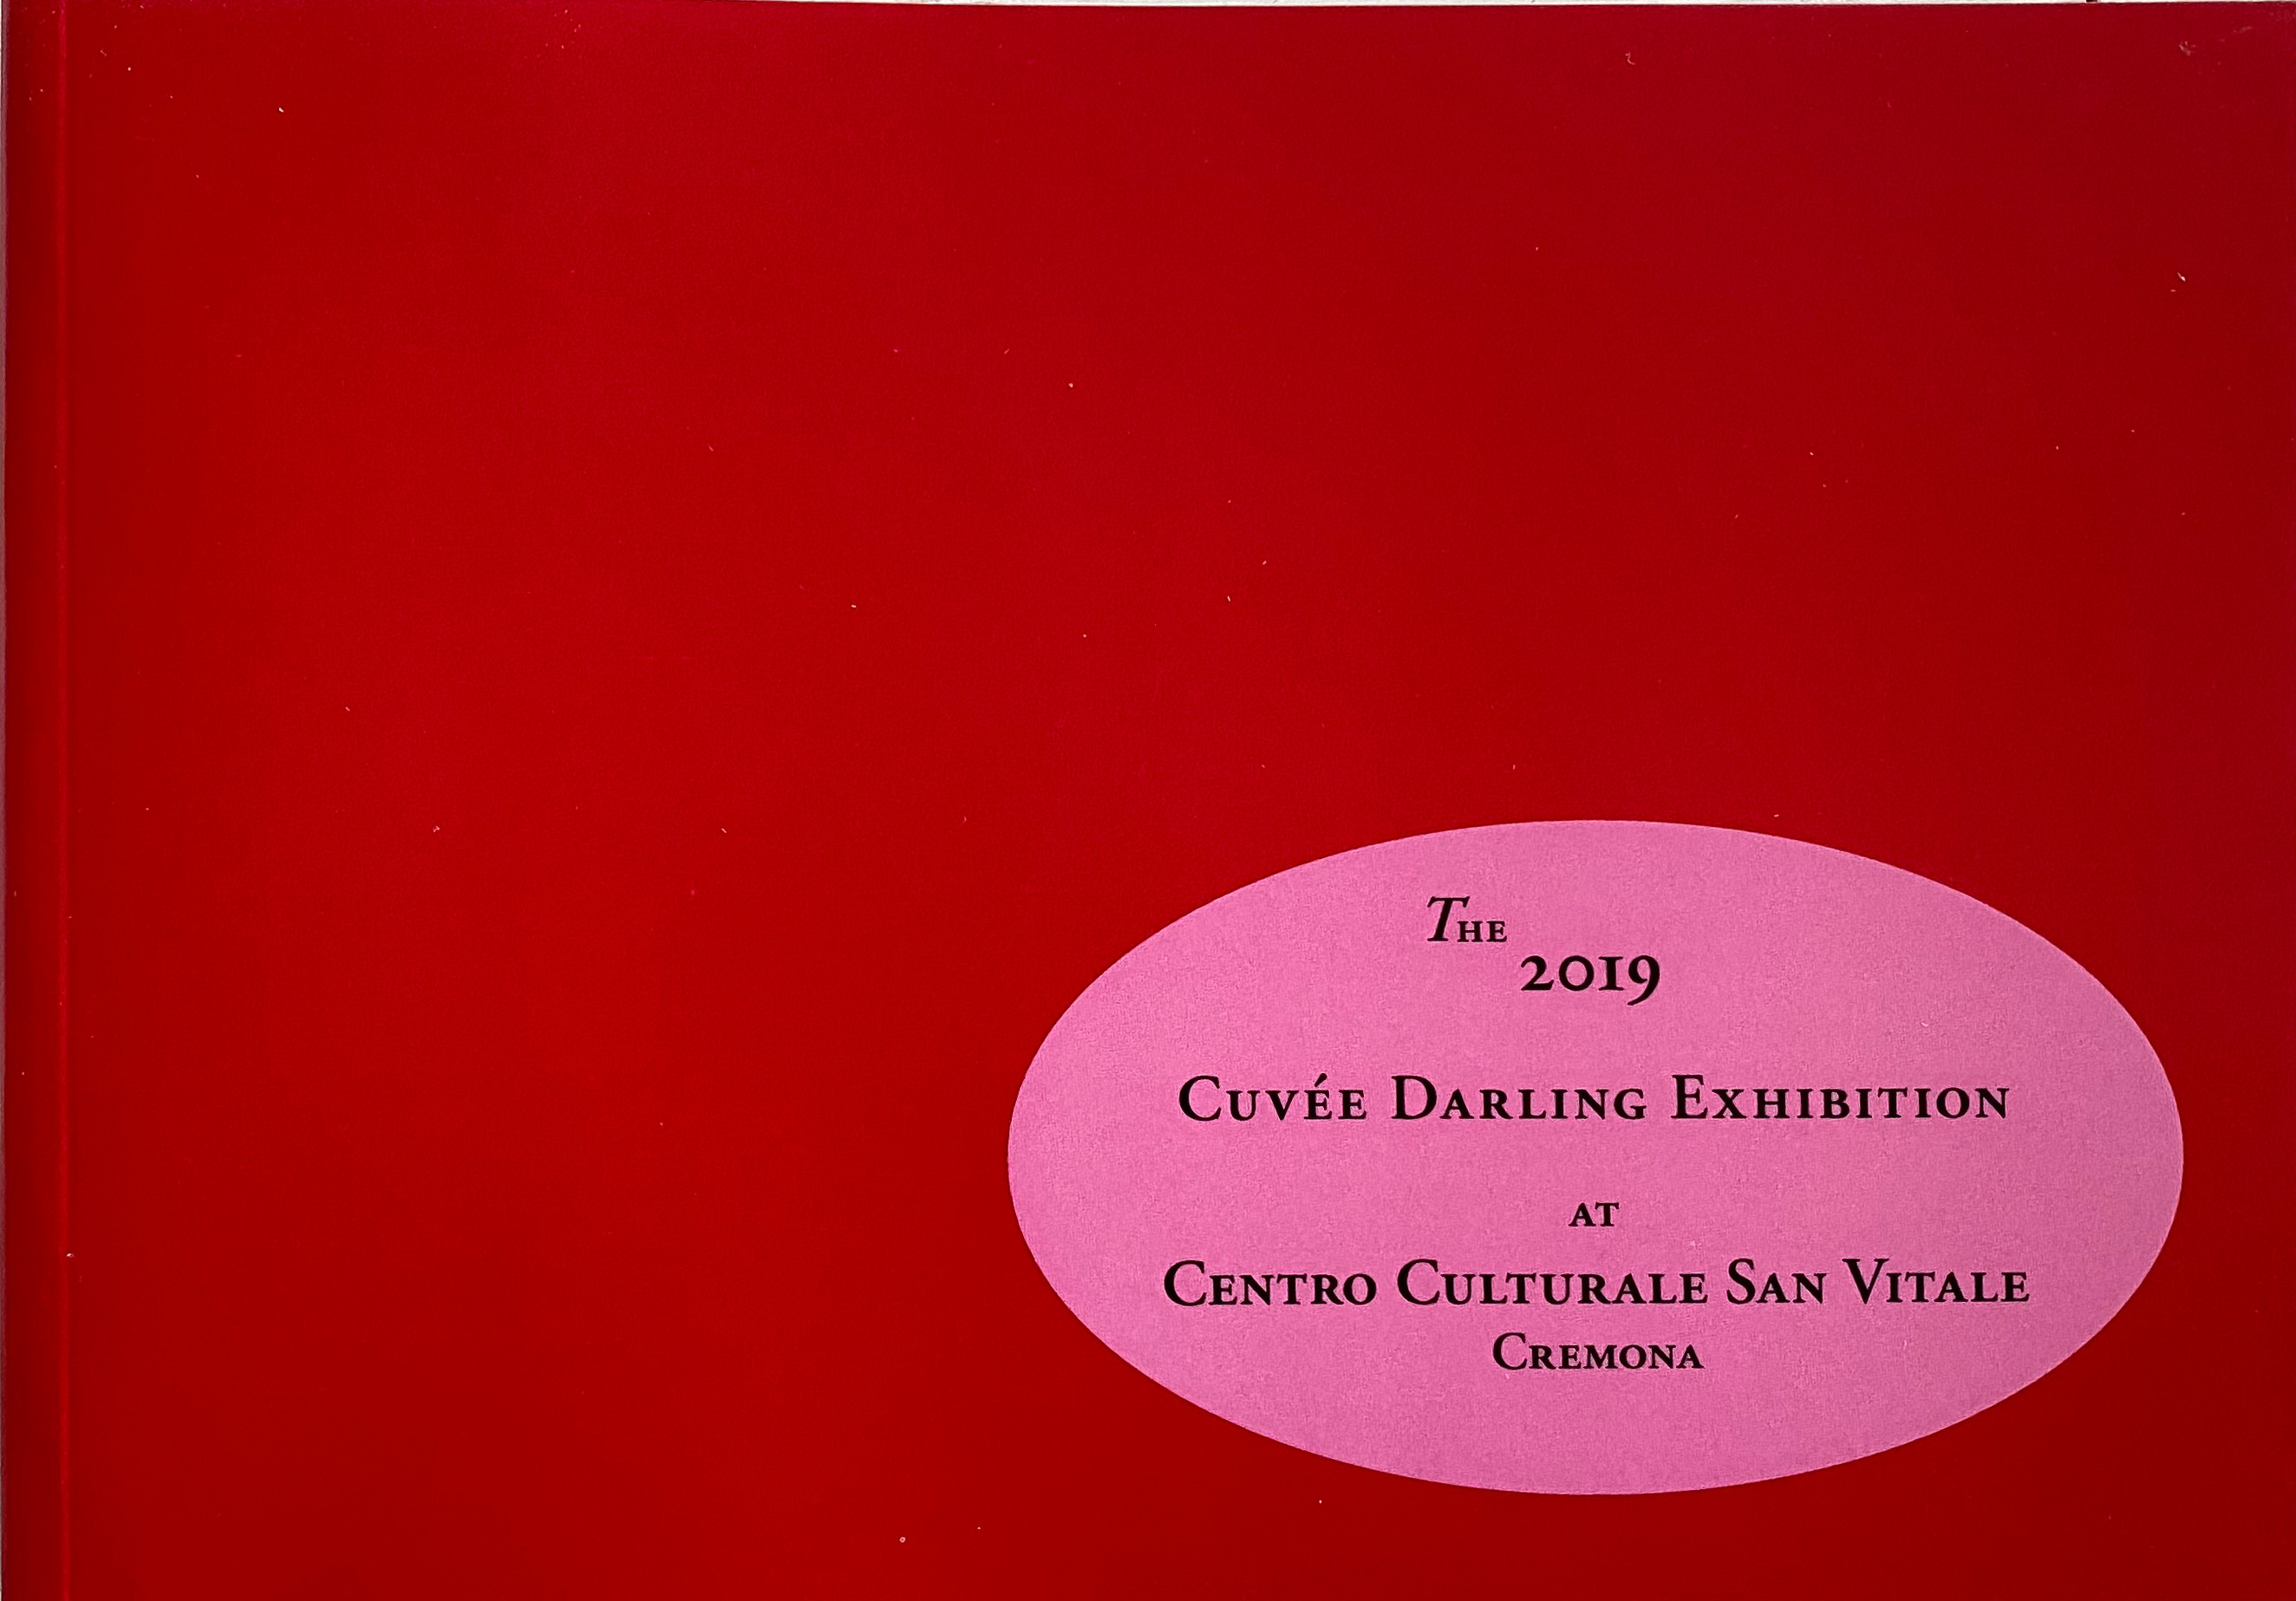 The 2019 Cuvee Darling Exhibition at Centro Culturale